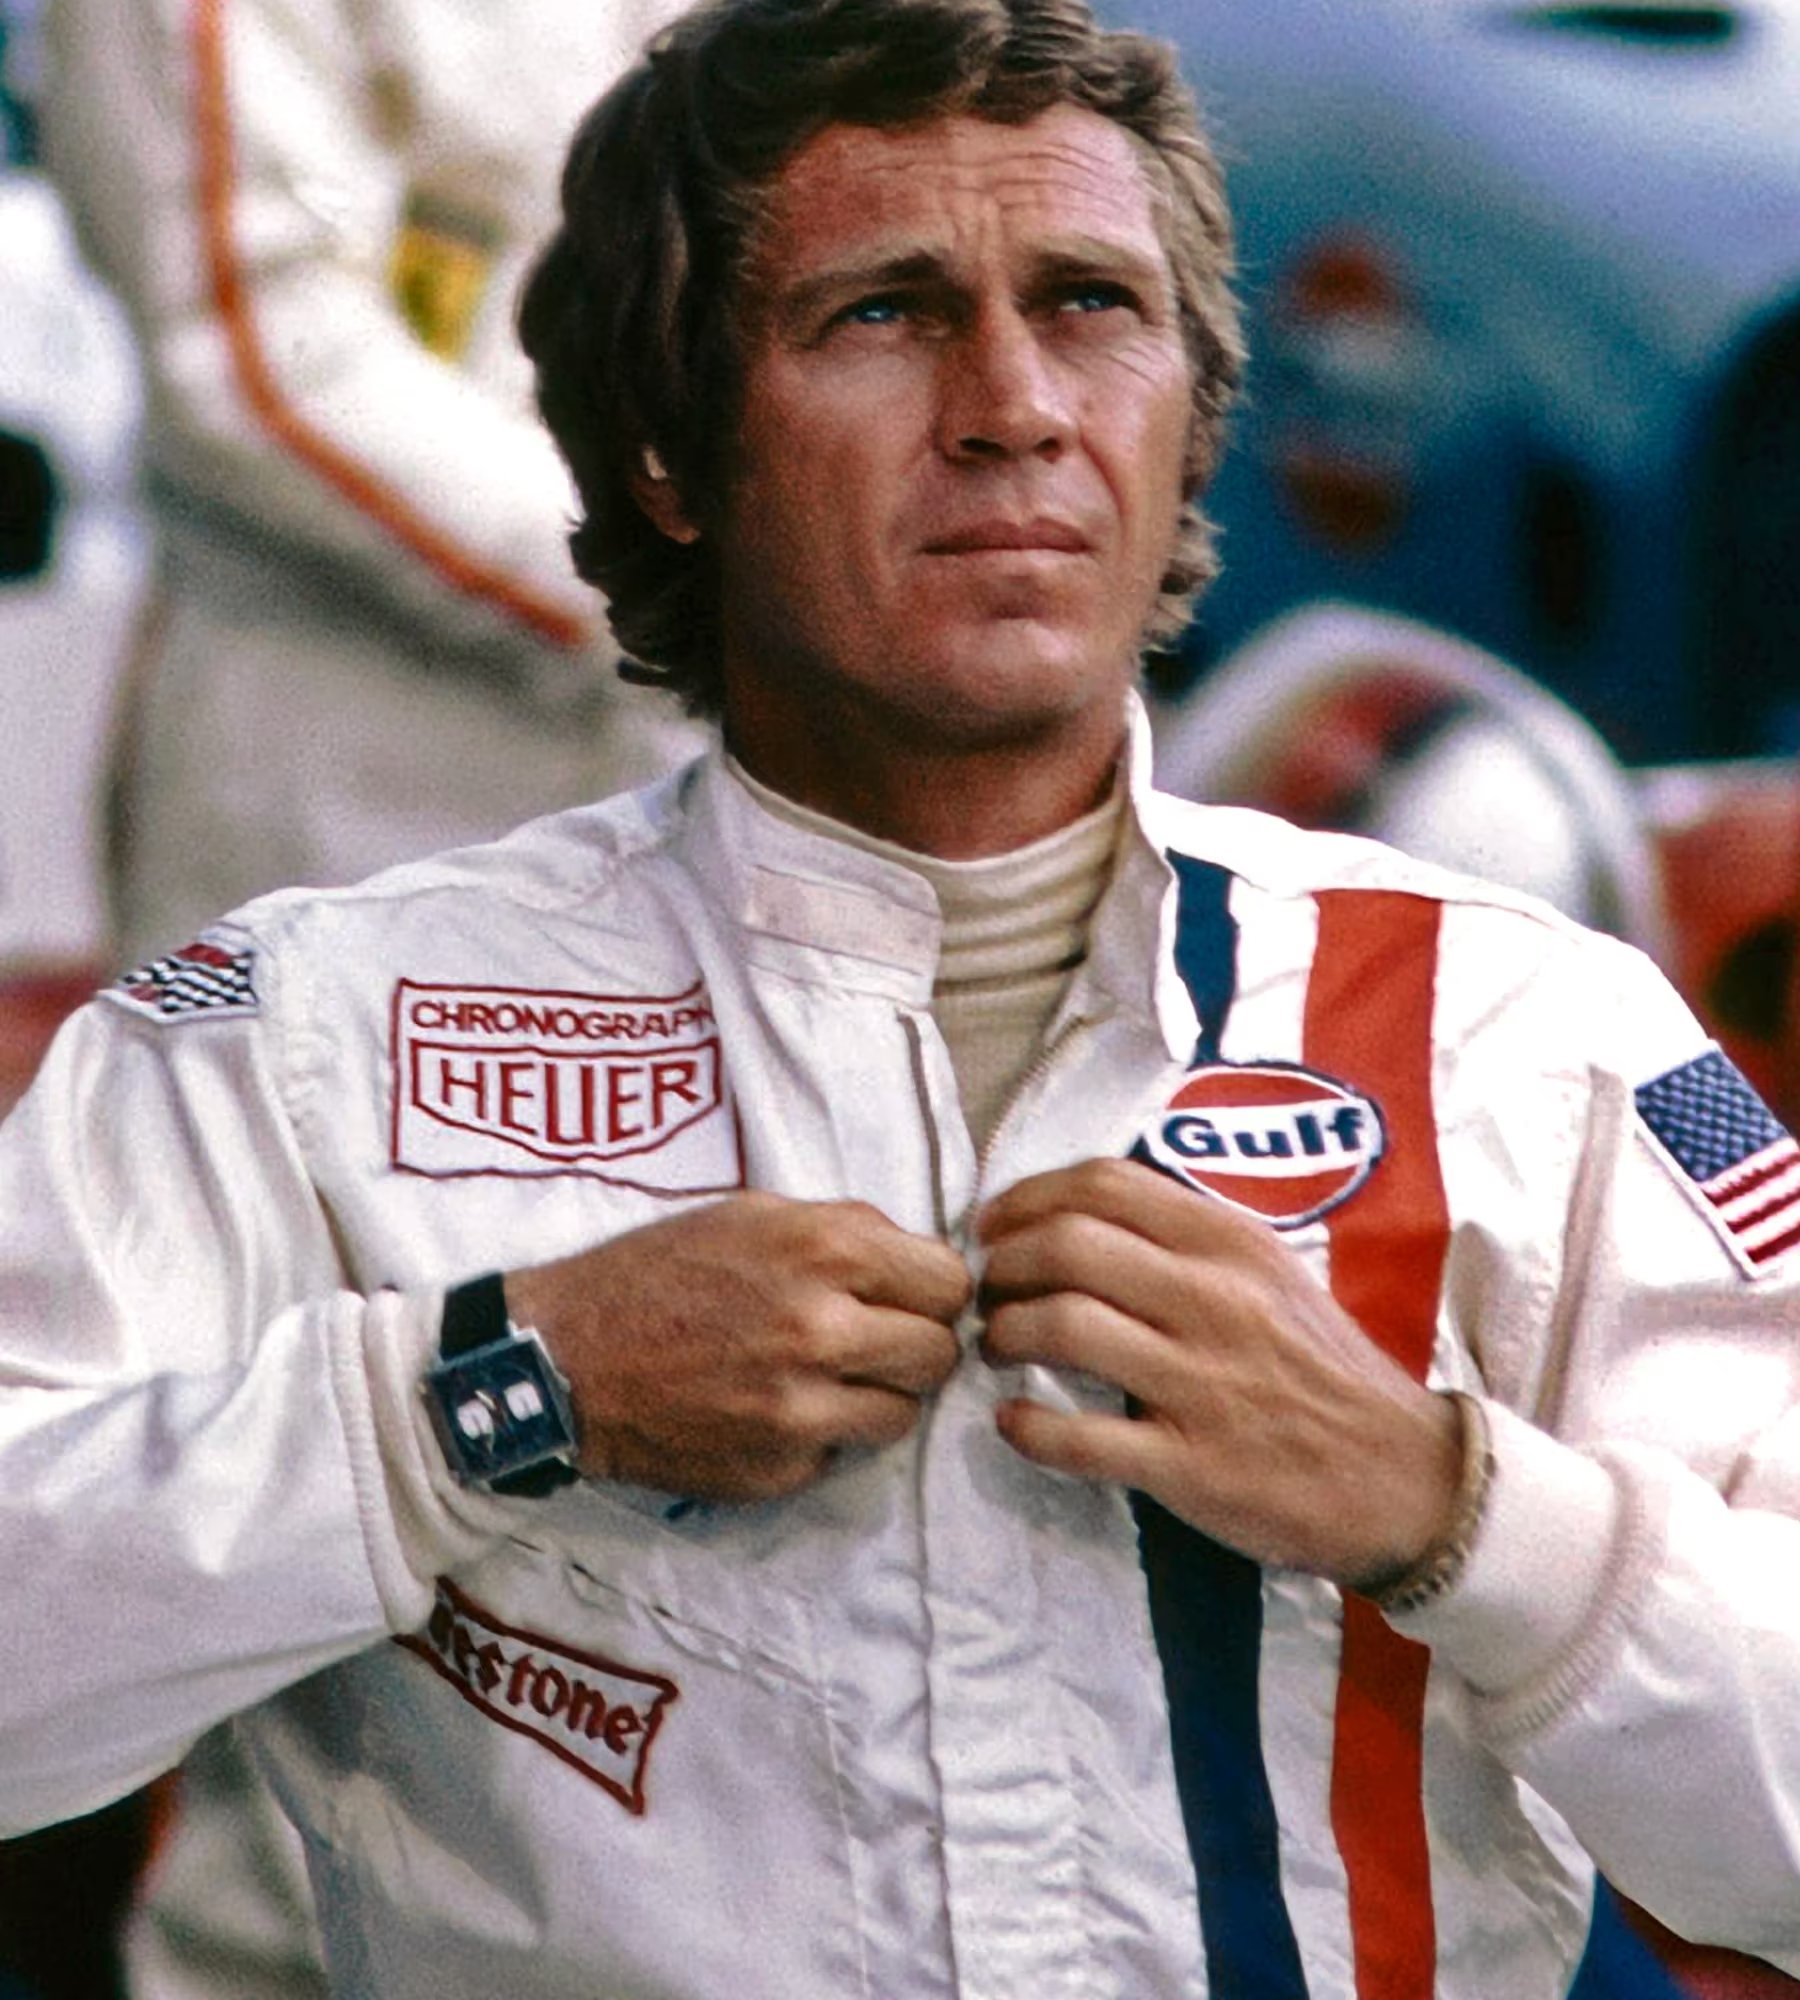 Steve McQueen in the 1971 movie Le Mans